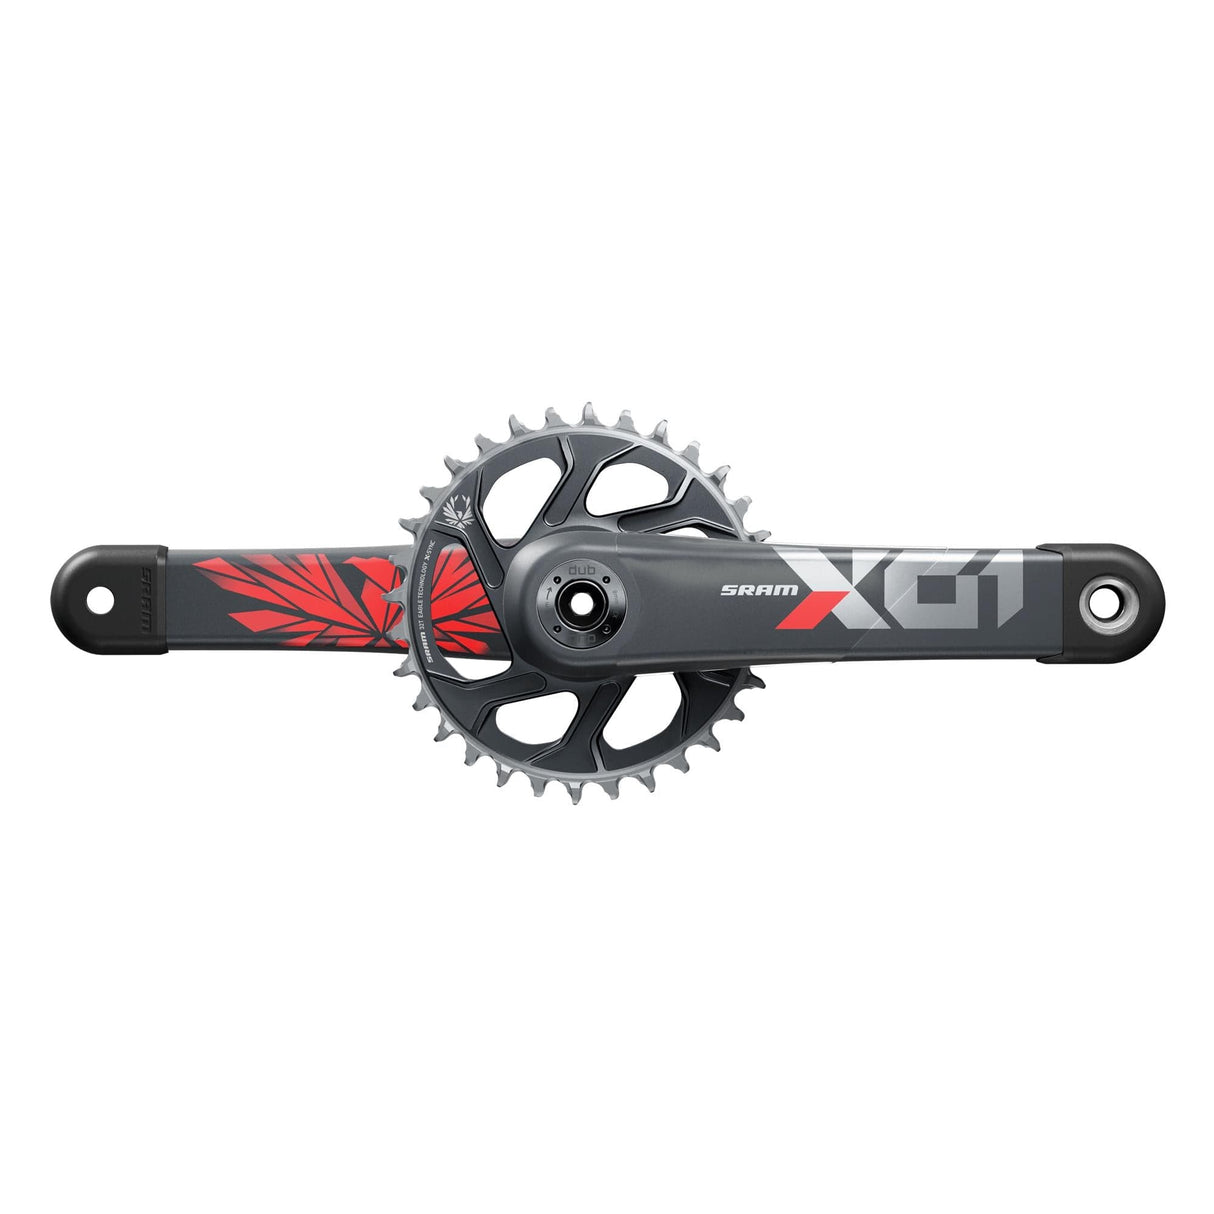 Sram Crankset X01 Eagle Dub 12S W Direct Mount 32T X-Sync 2 Chainring (Dub Cups/Bearings Not Included) C3: Lunar Oxy 175Mm